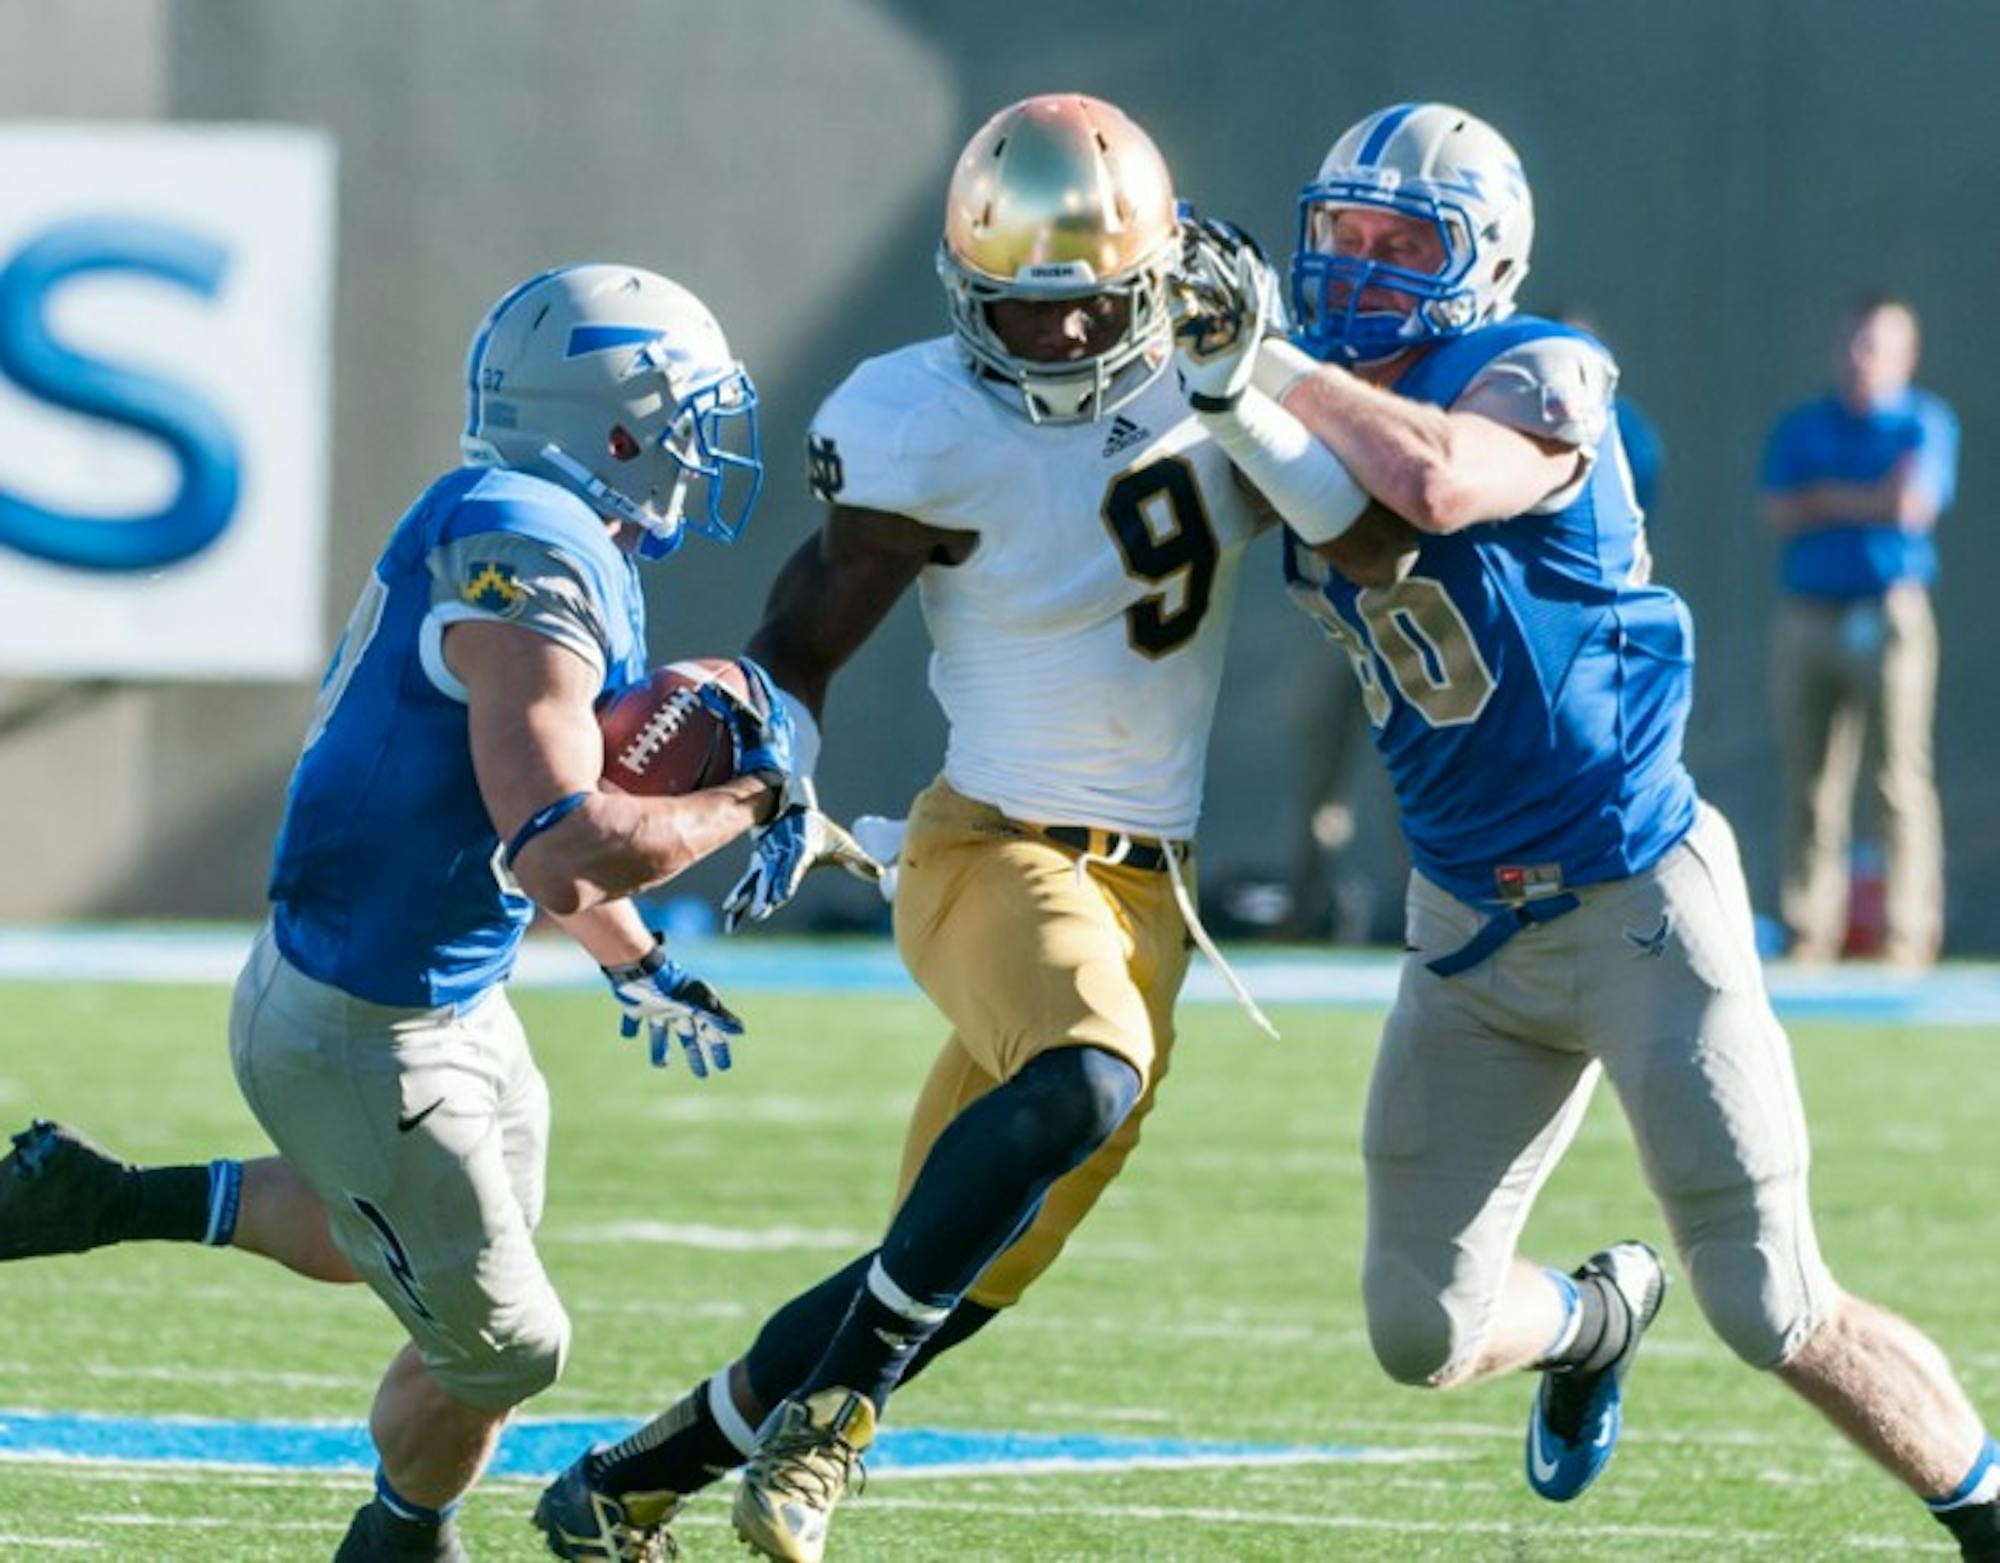 Sophomore linebacker Jaylon Smith zeroes in on the ballcarrier in the Oct. 26 game against Air Force.